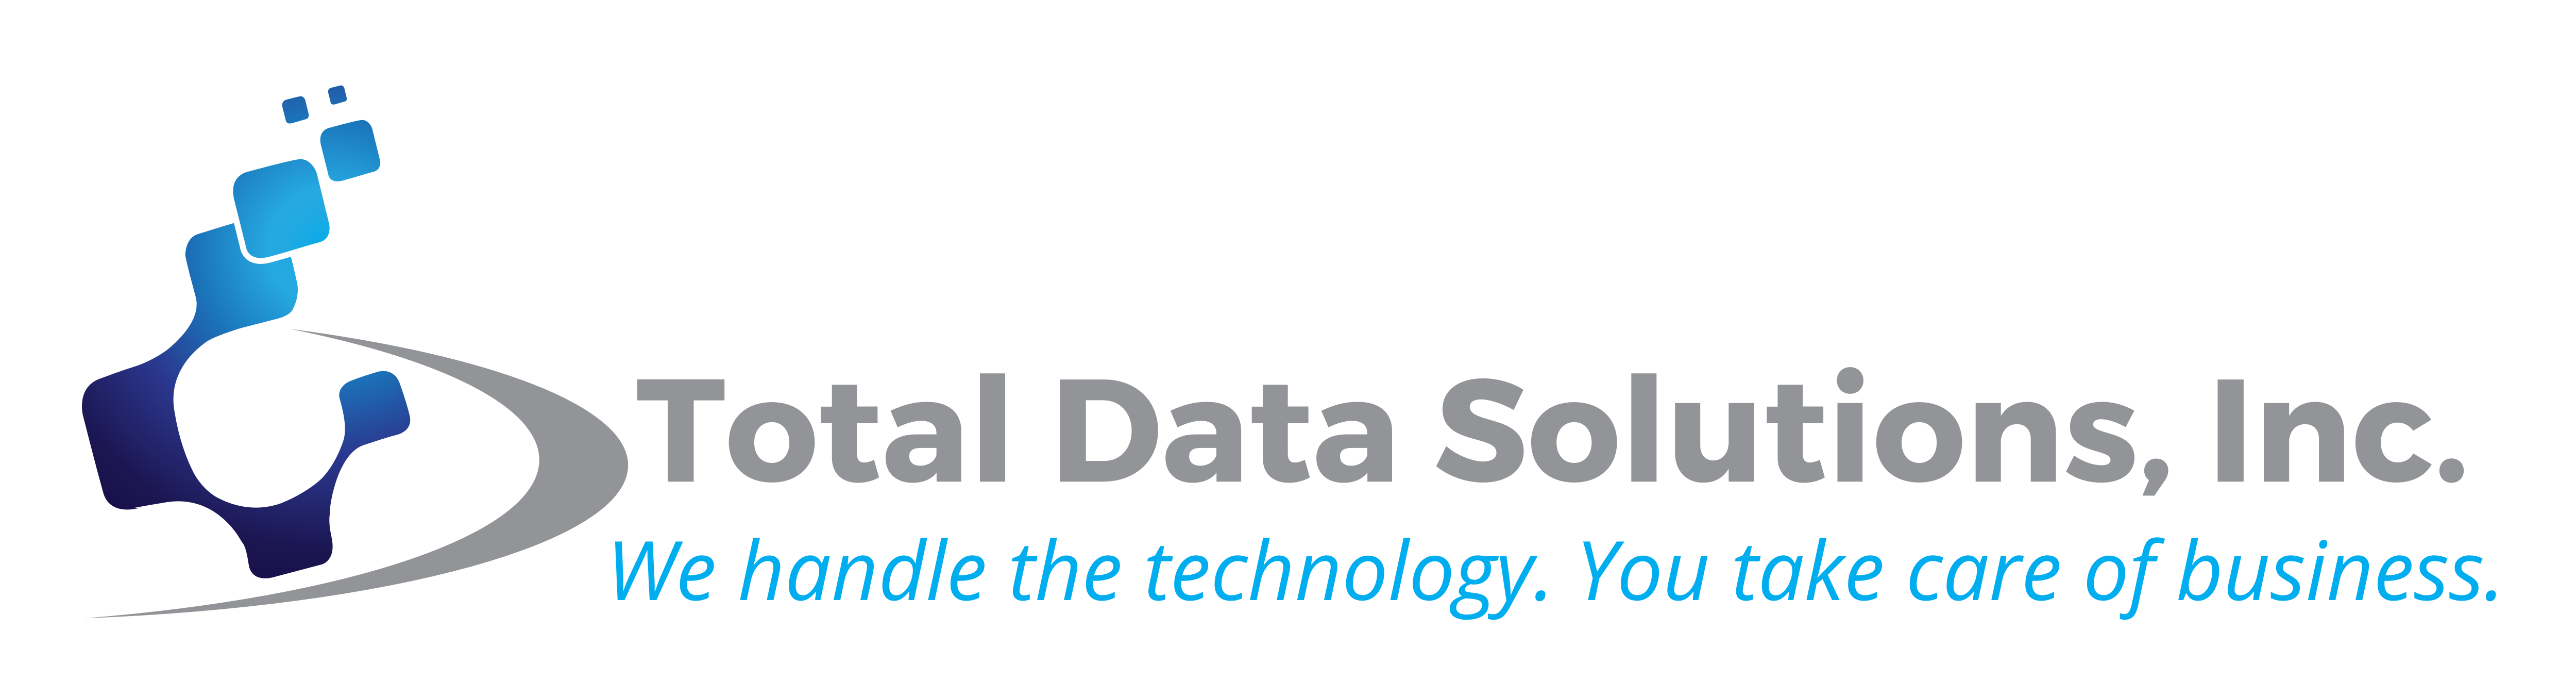 Total Data Solutions, Inc.